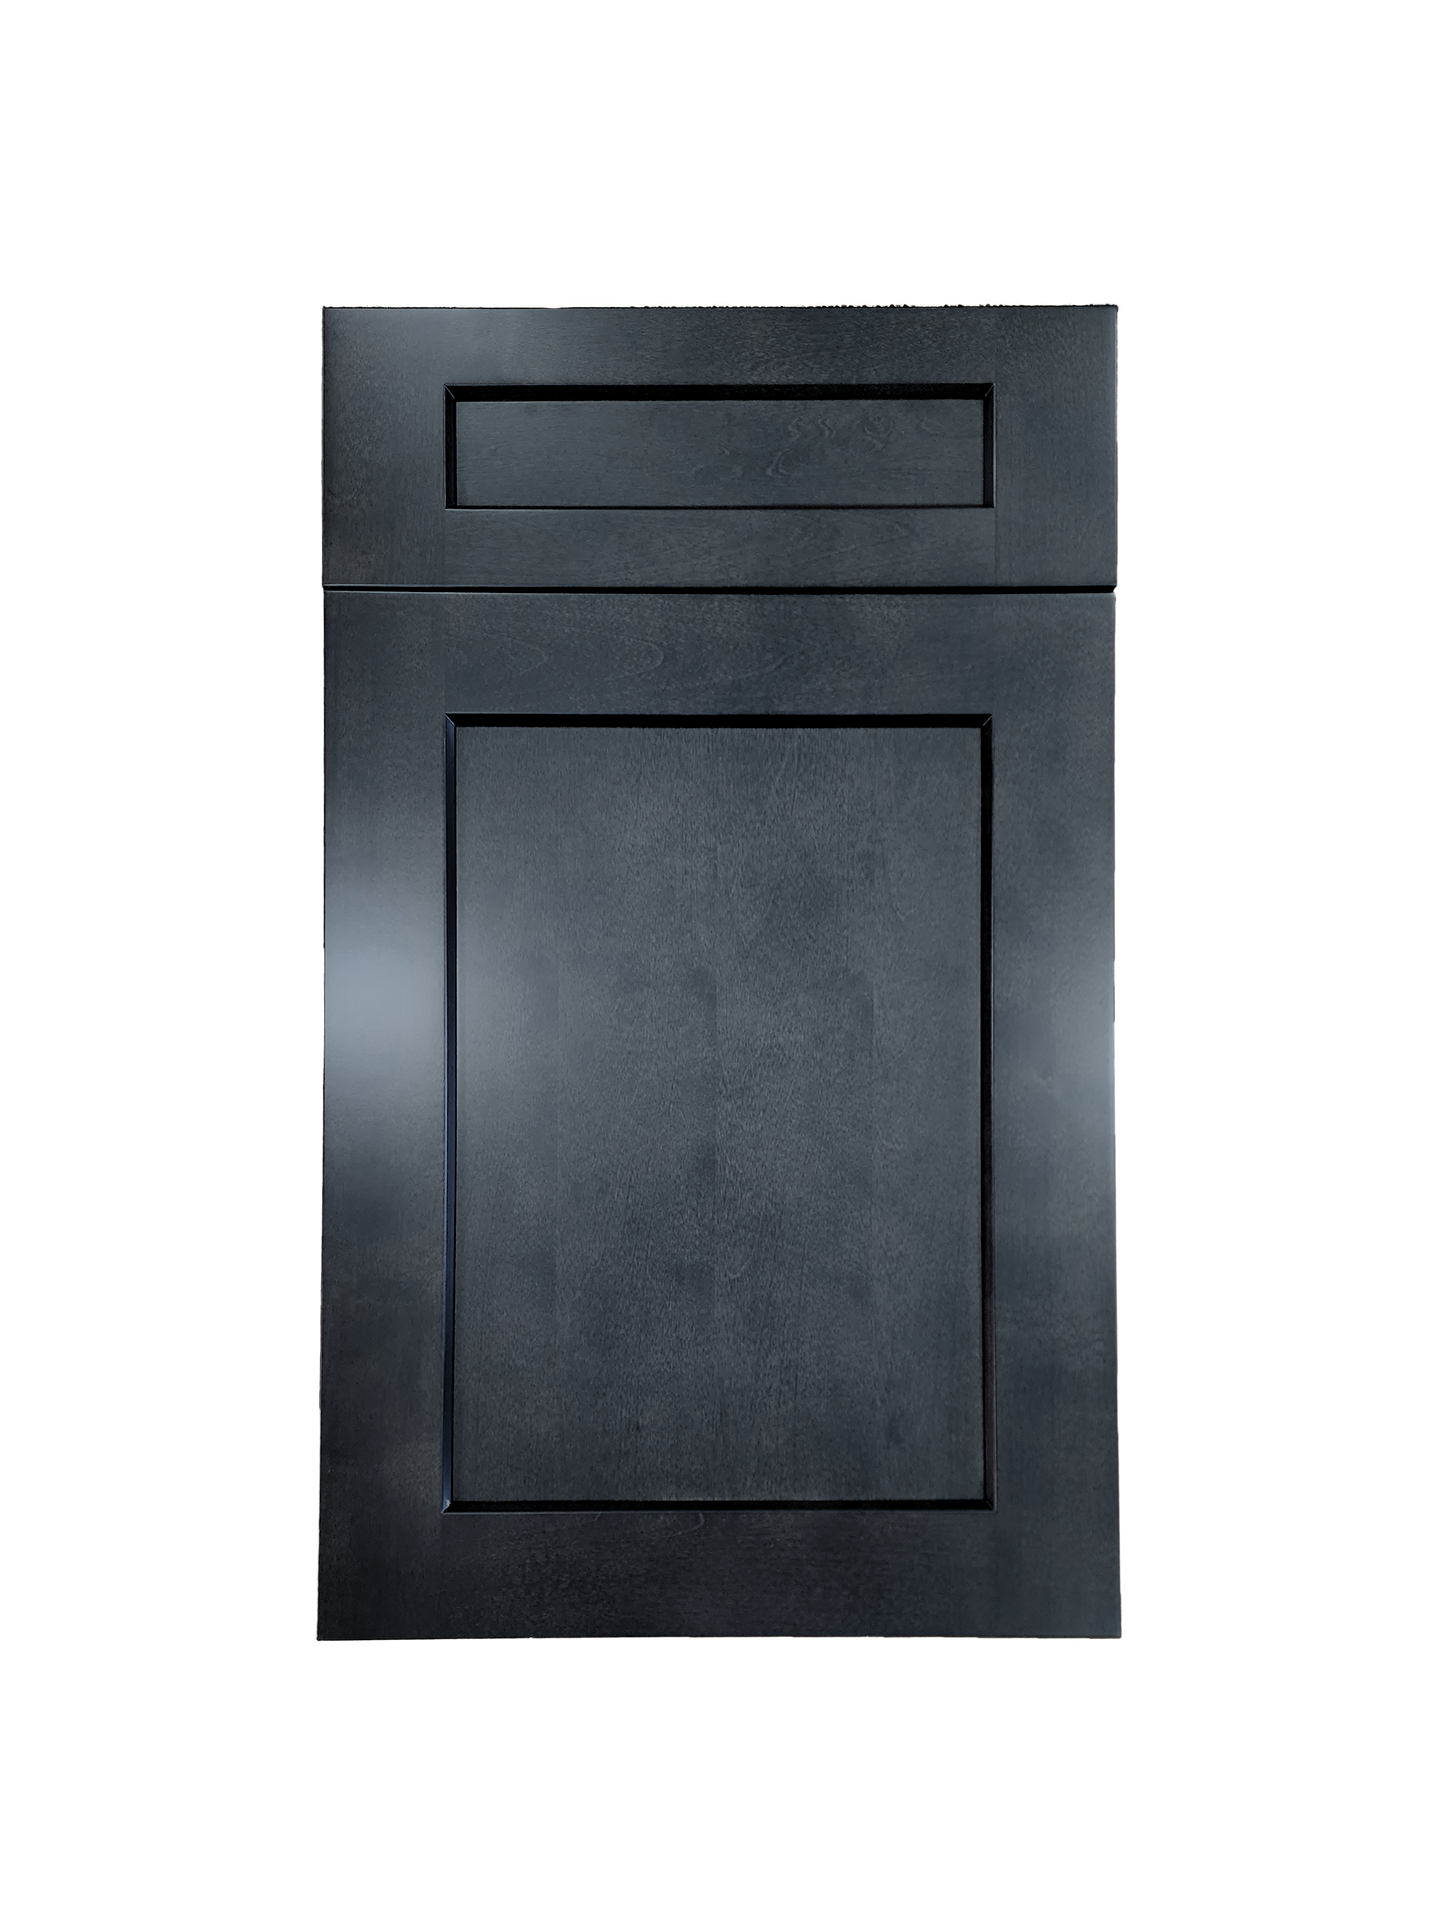 Stormy Grey Base Cabinet 27 inches wide 24 inches deep 34.5 inches tall with Stormy Grey box and Stormy Grey doors